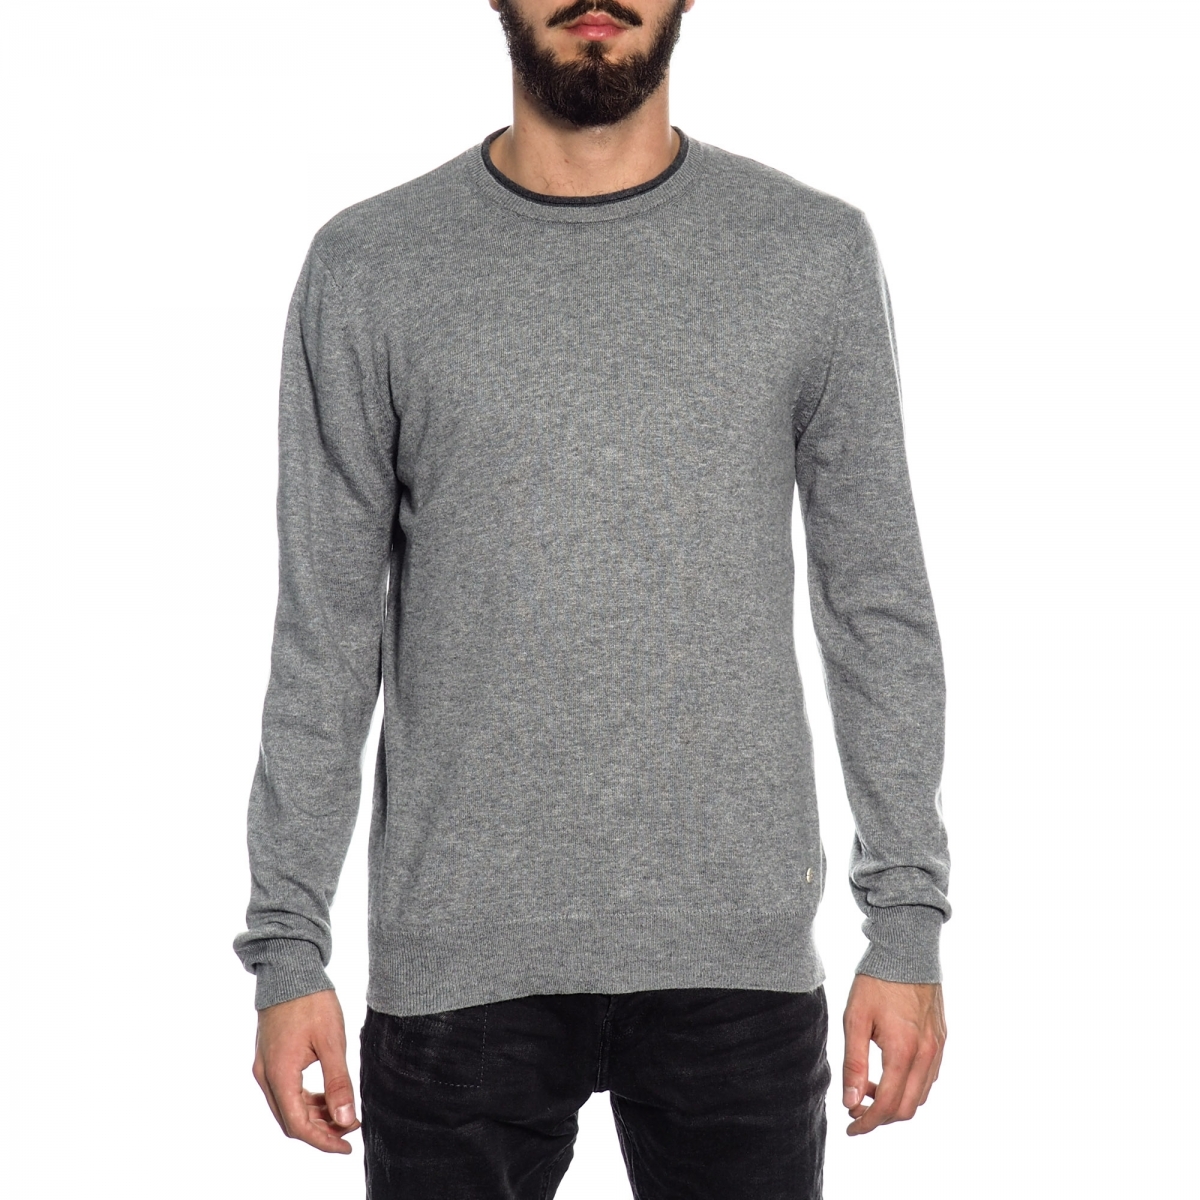 ropa Maglieria OUTLET hombre Pullover GLS32092 GIANNI LUPO Cafedelmar Shop